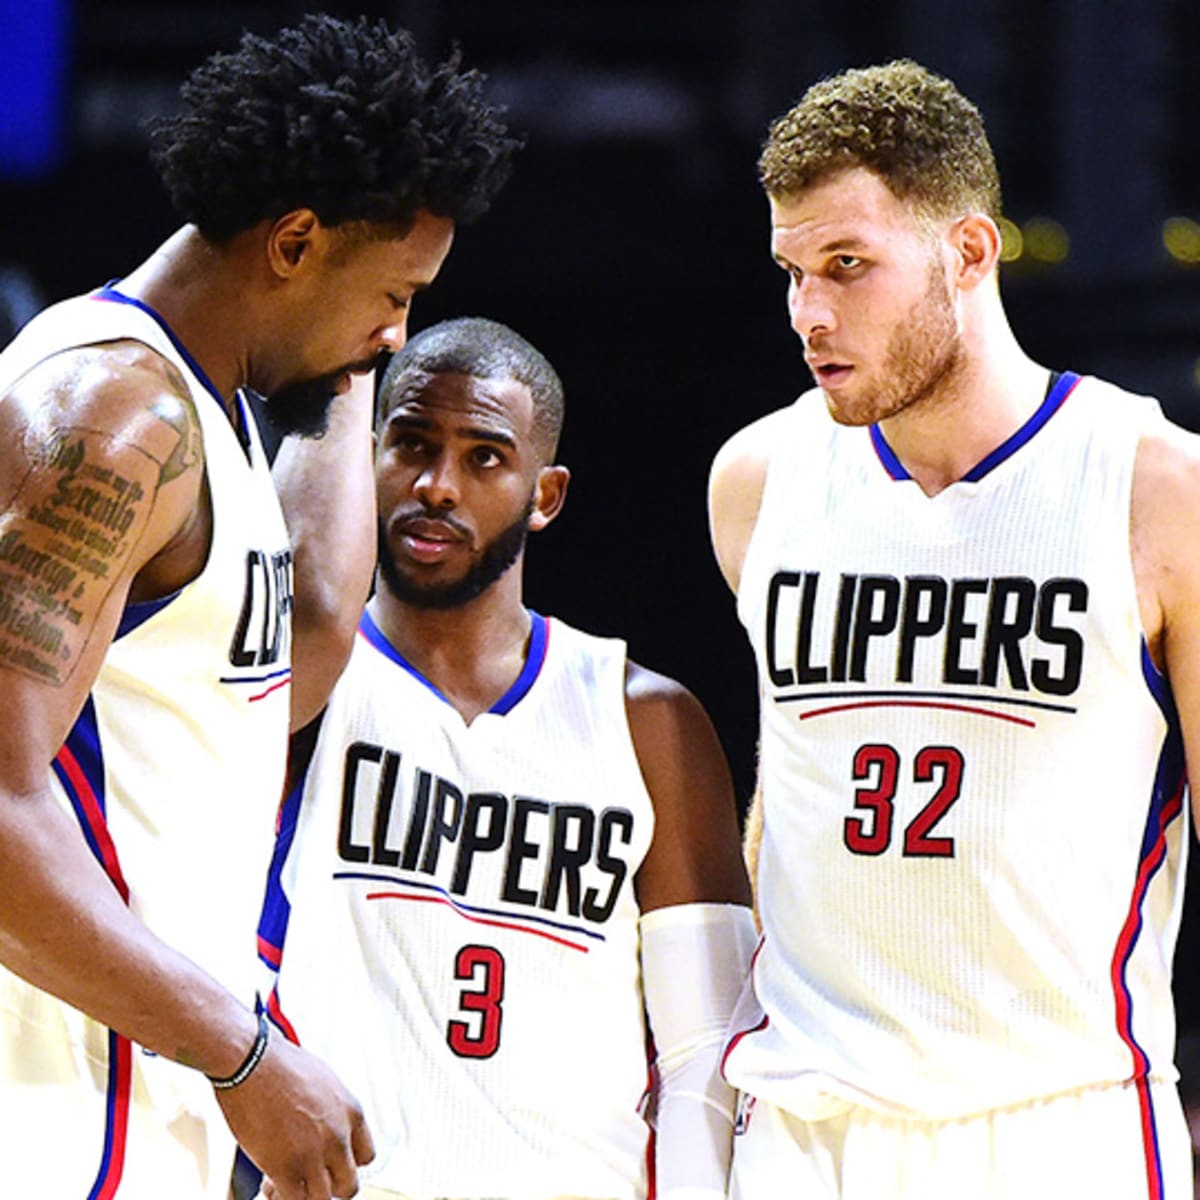 NBA: LA Clippers' Blake Griffin suspended for punching team employee